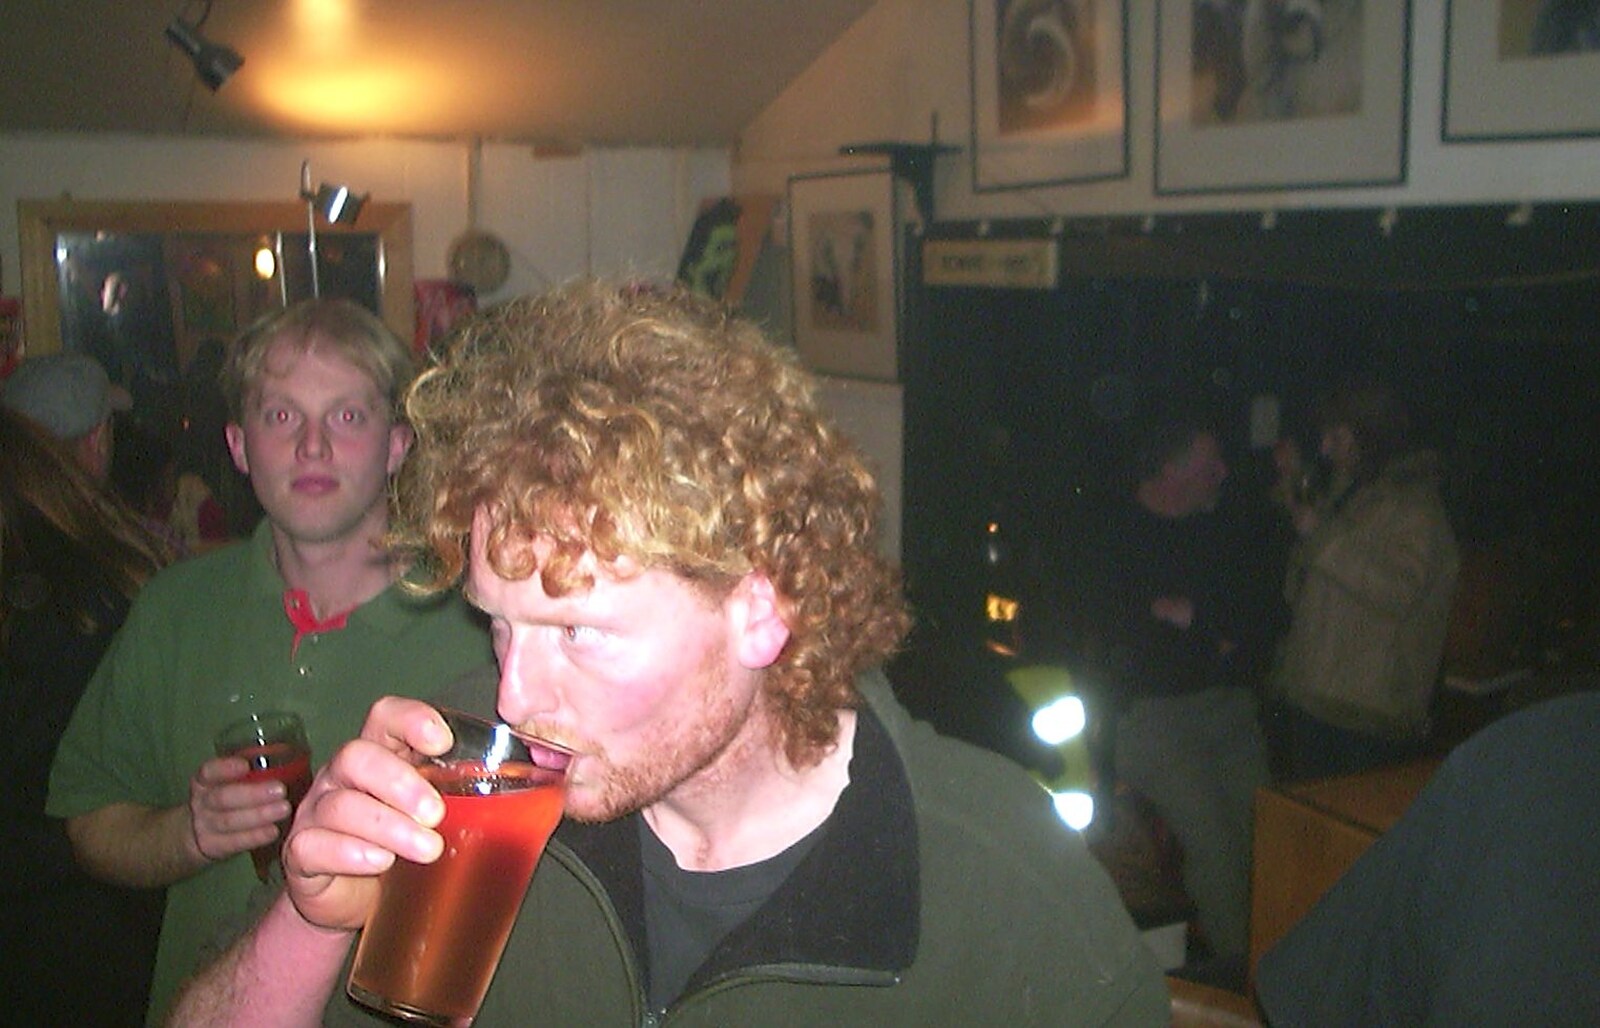 Wavy roams around with a pint from The Swan's Cellar, and Bill's Mambo Night at the Barrel, Banham, Norfolk - 6th February 2004